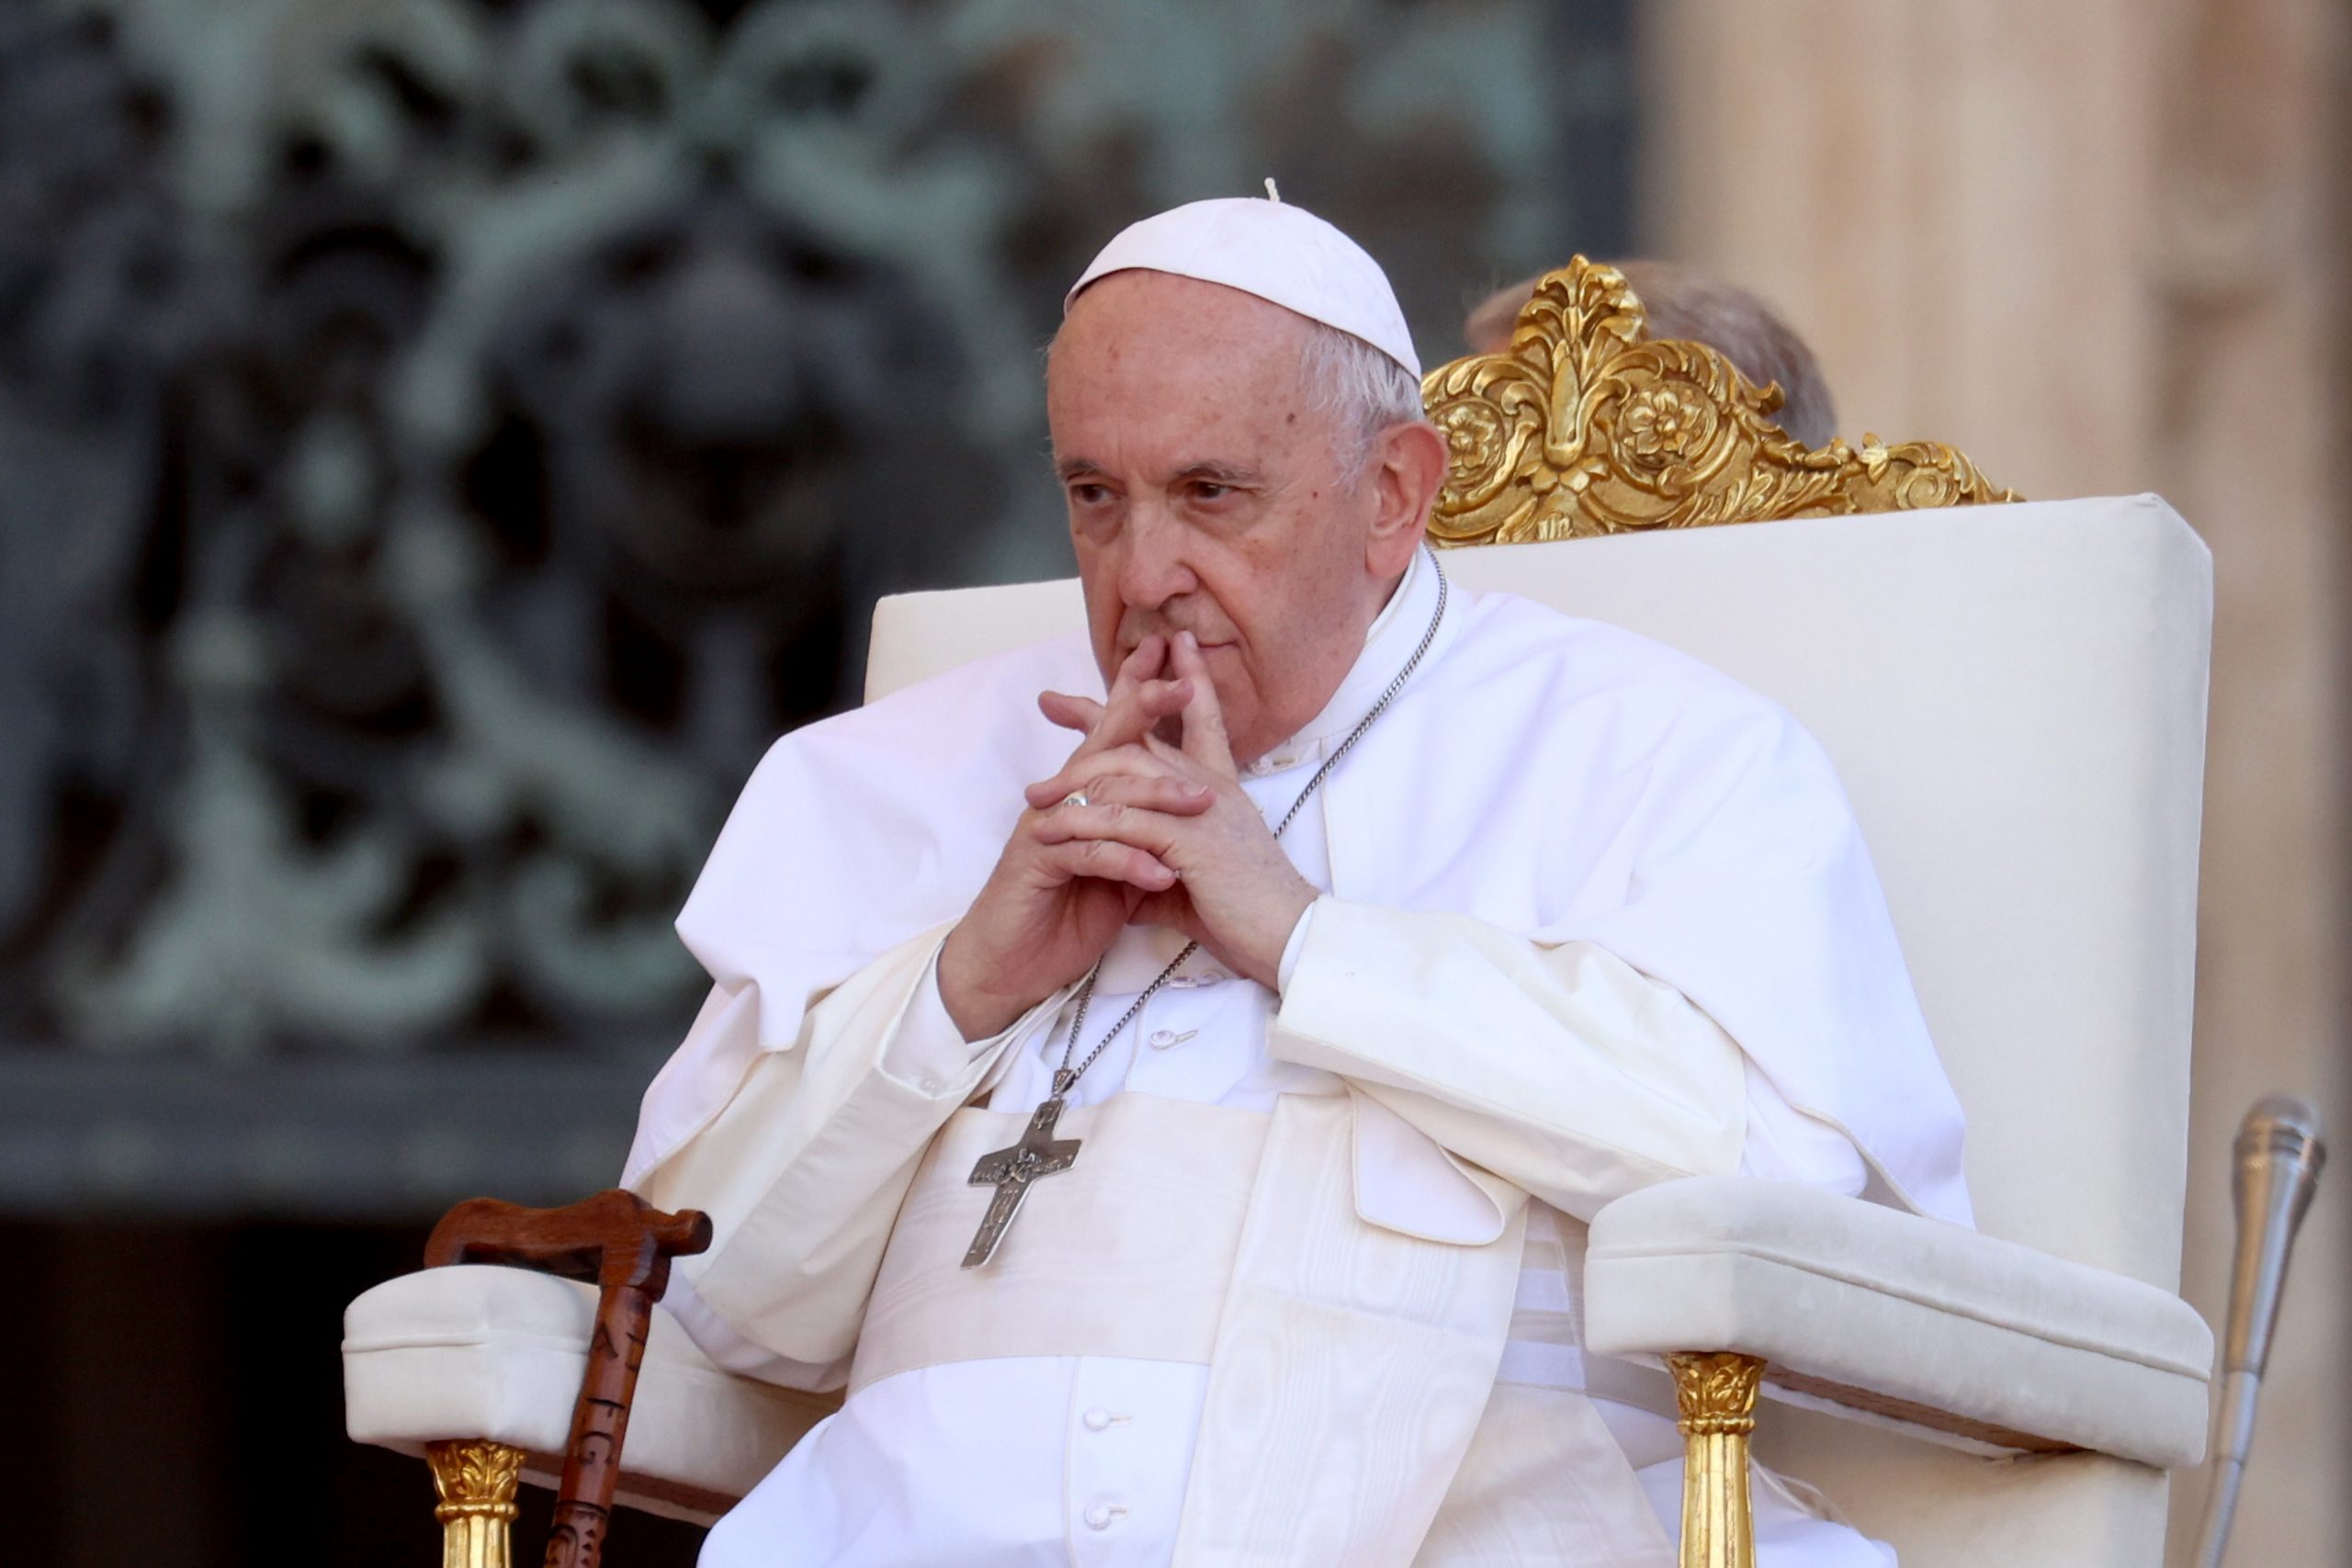 Pope Says He Respects SCOTUS’ Decision to Overturn Roe v Wade, But Still Needs to Study It